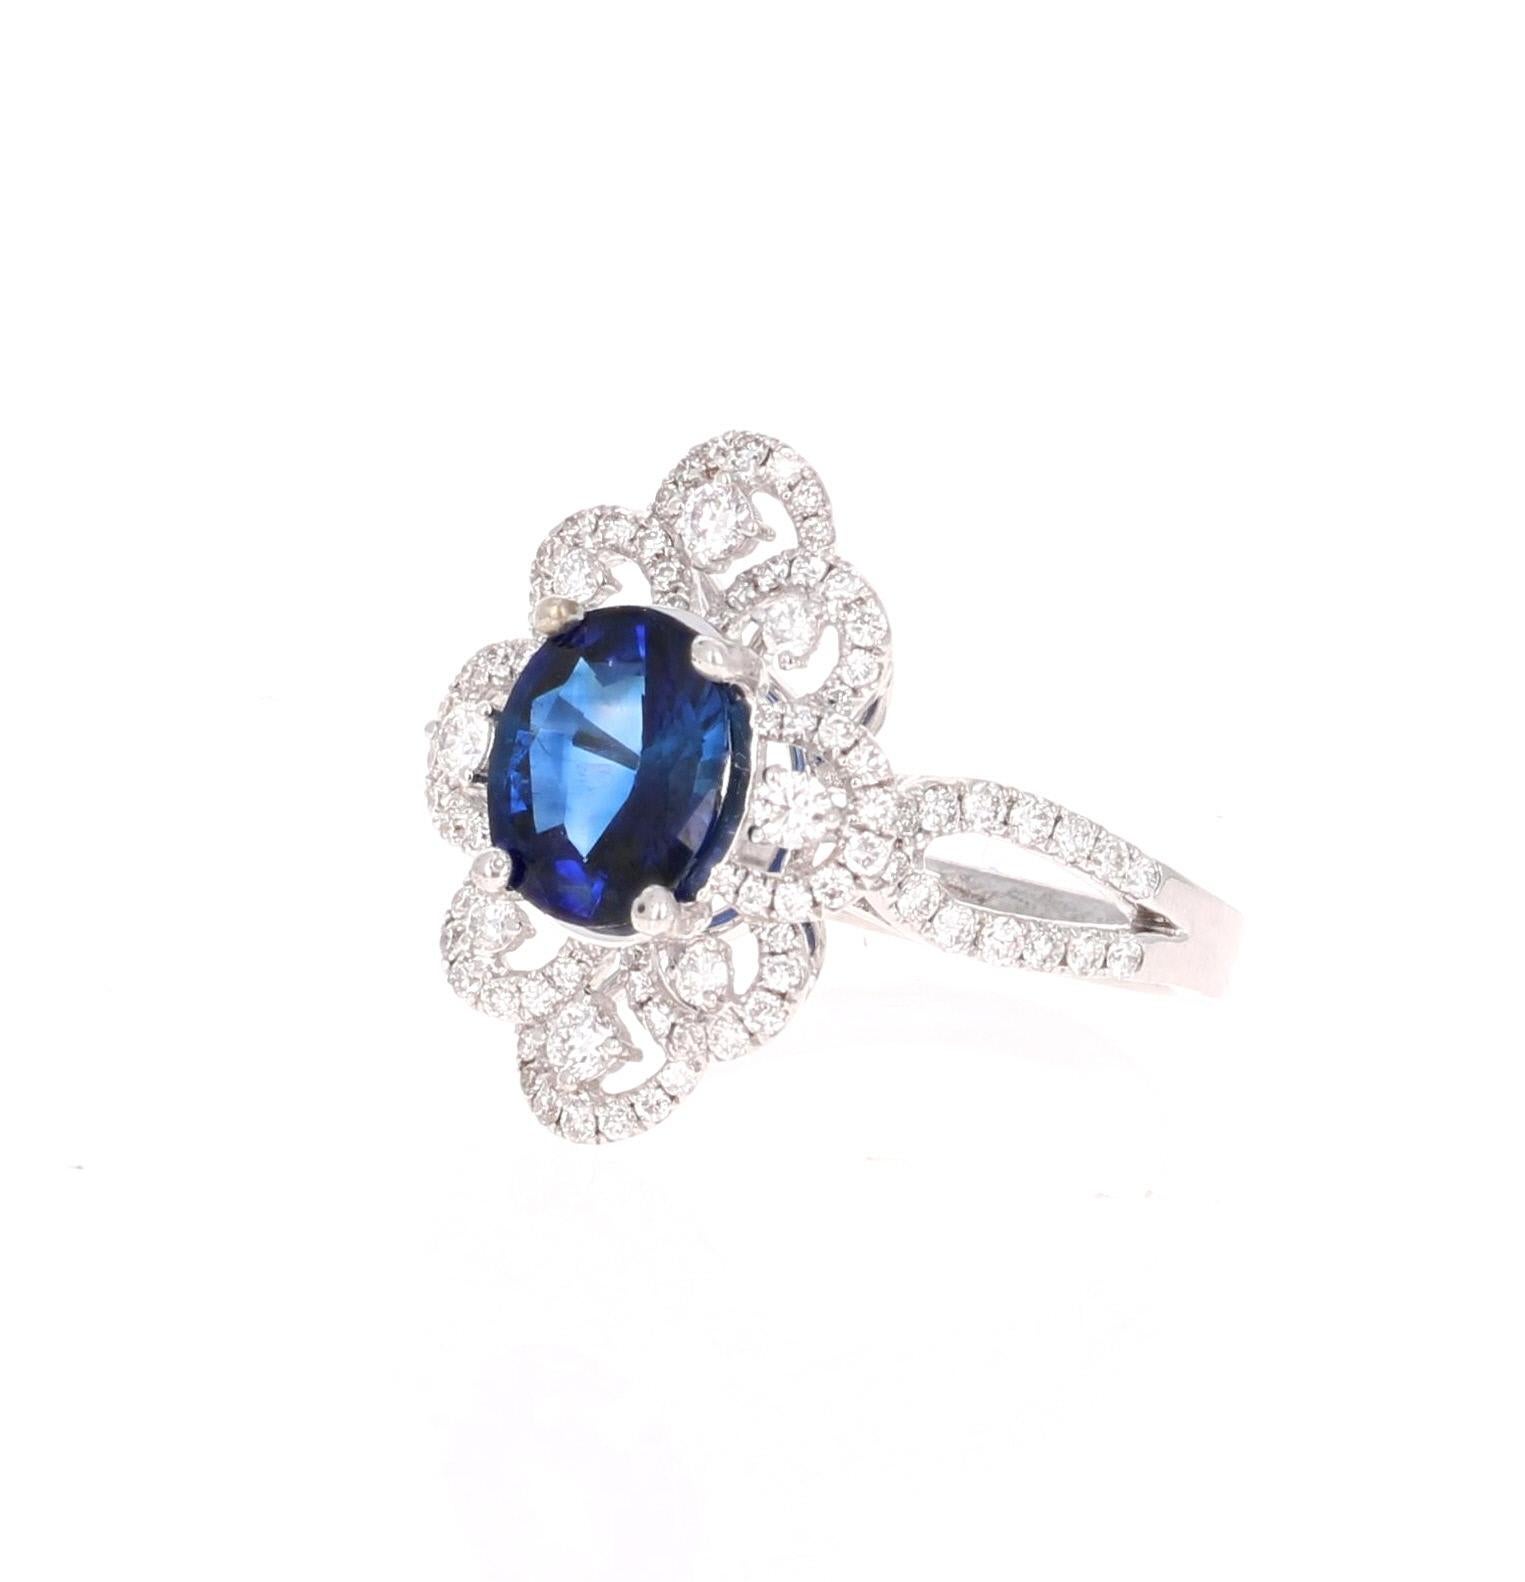 Beautiful Sapphire Diamond ring with an intricate setting! 

This ring has a Blue Sapphire that weighs 1.99 Carats and is GIA Certified. The Sapphire is a natural Blue Oval Cut with indications of heating. The GIA Certificate Number is: